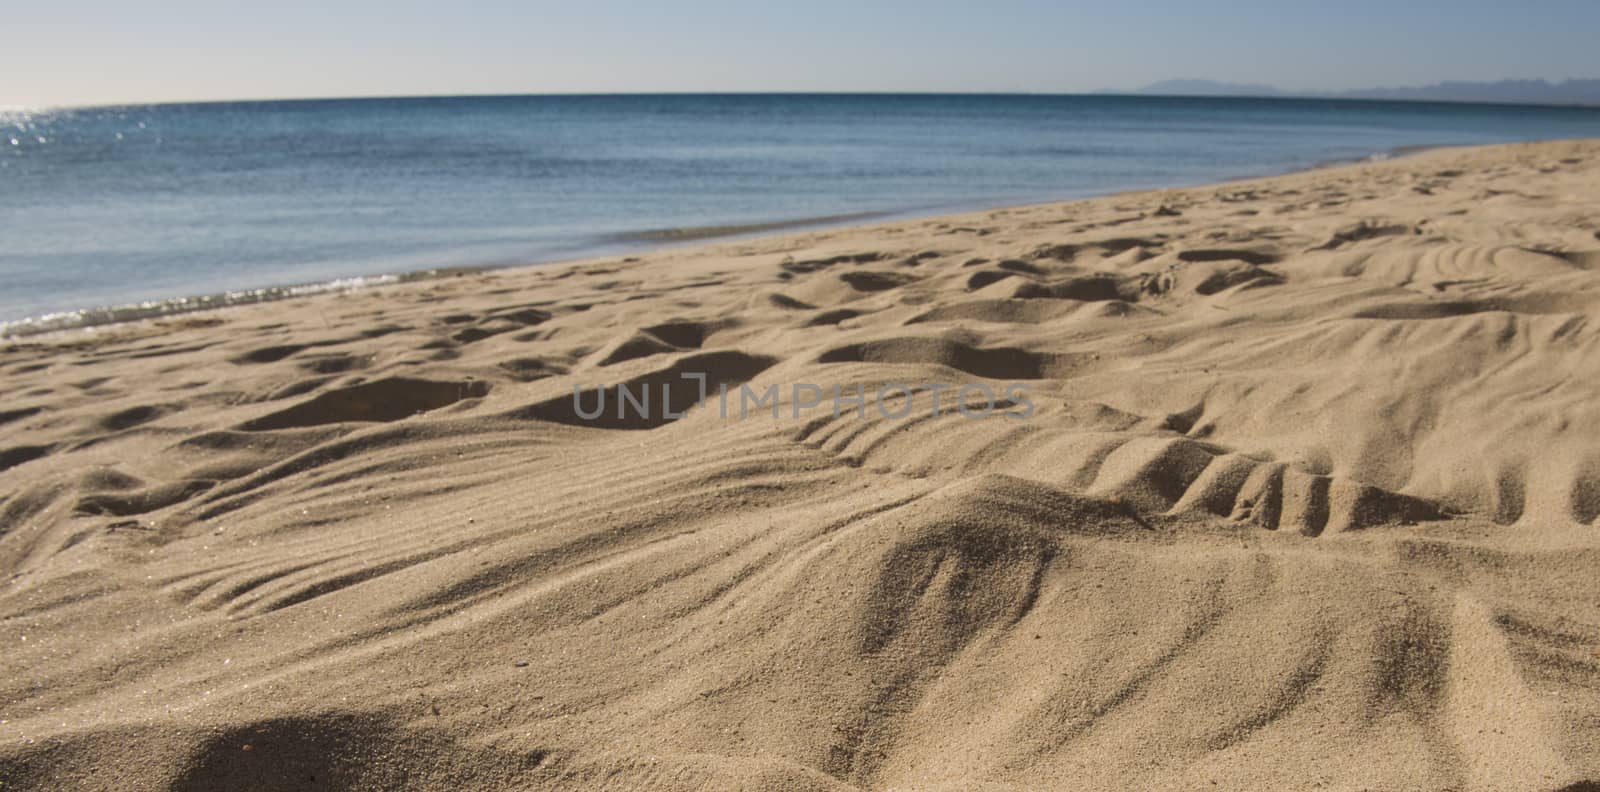 Closeup view across an empty sandy tropical beach to the open ocean with horizon in distance